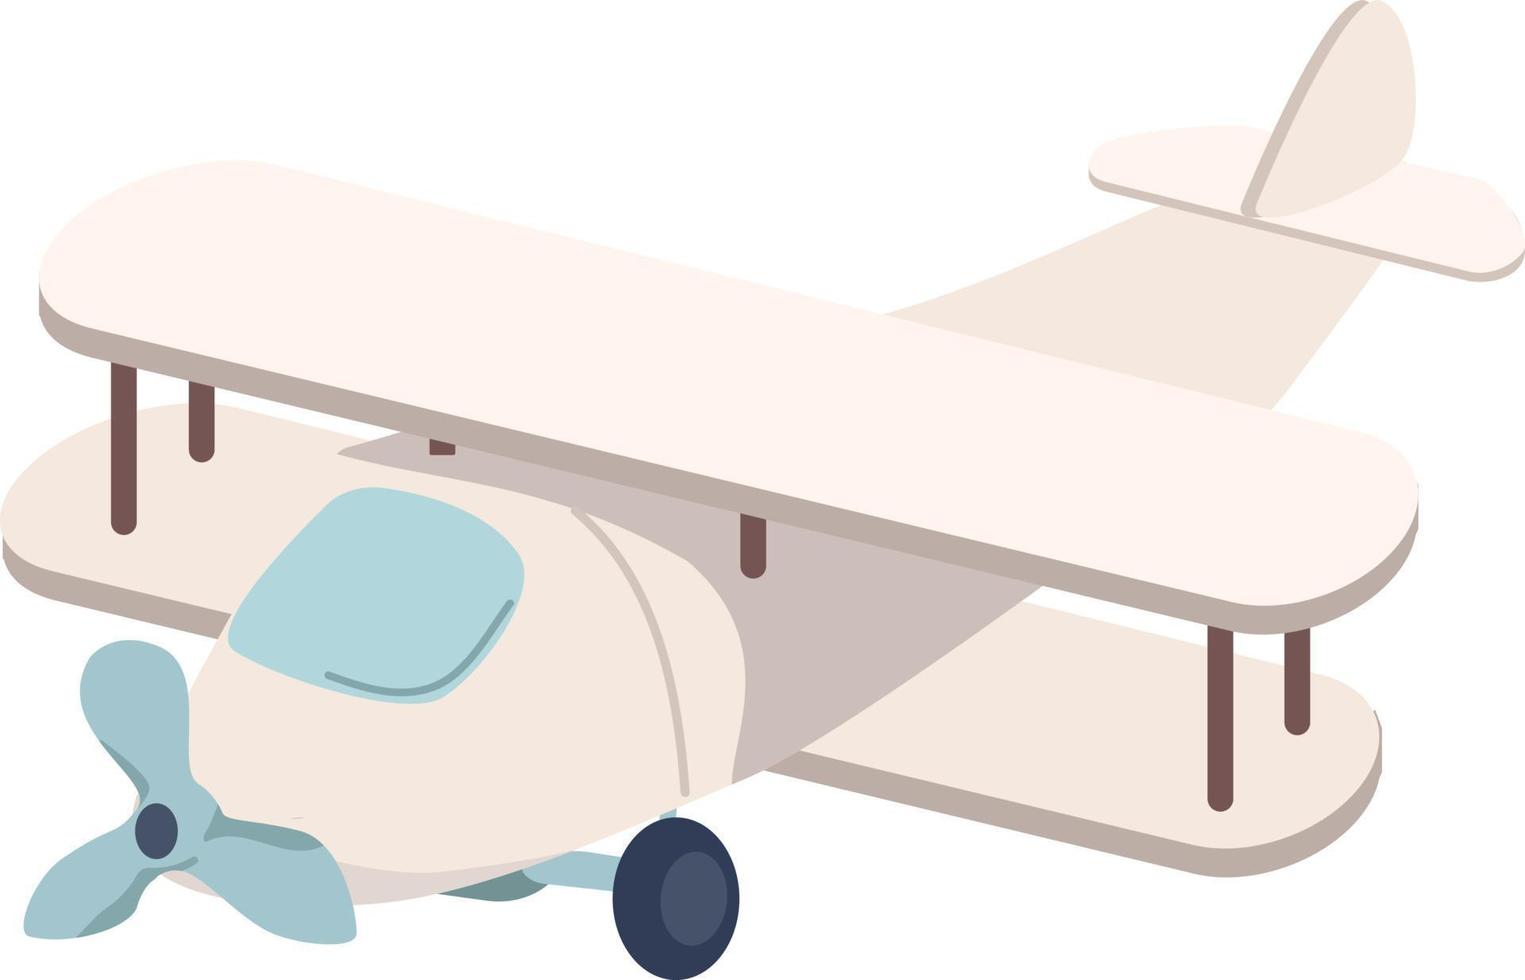 Building airplane model semi flat color vector object